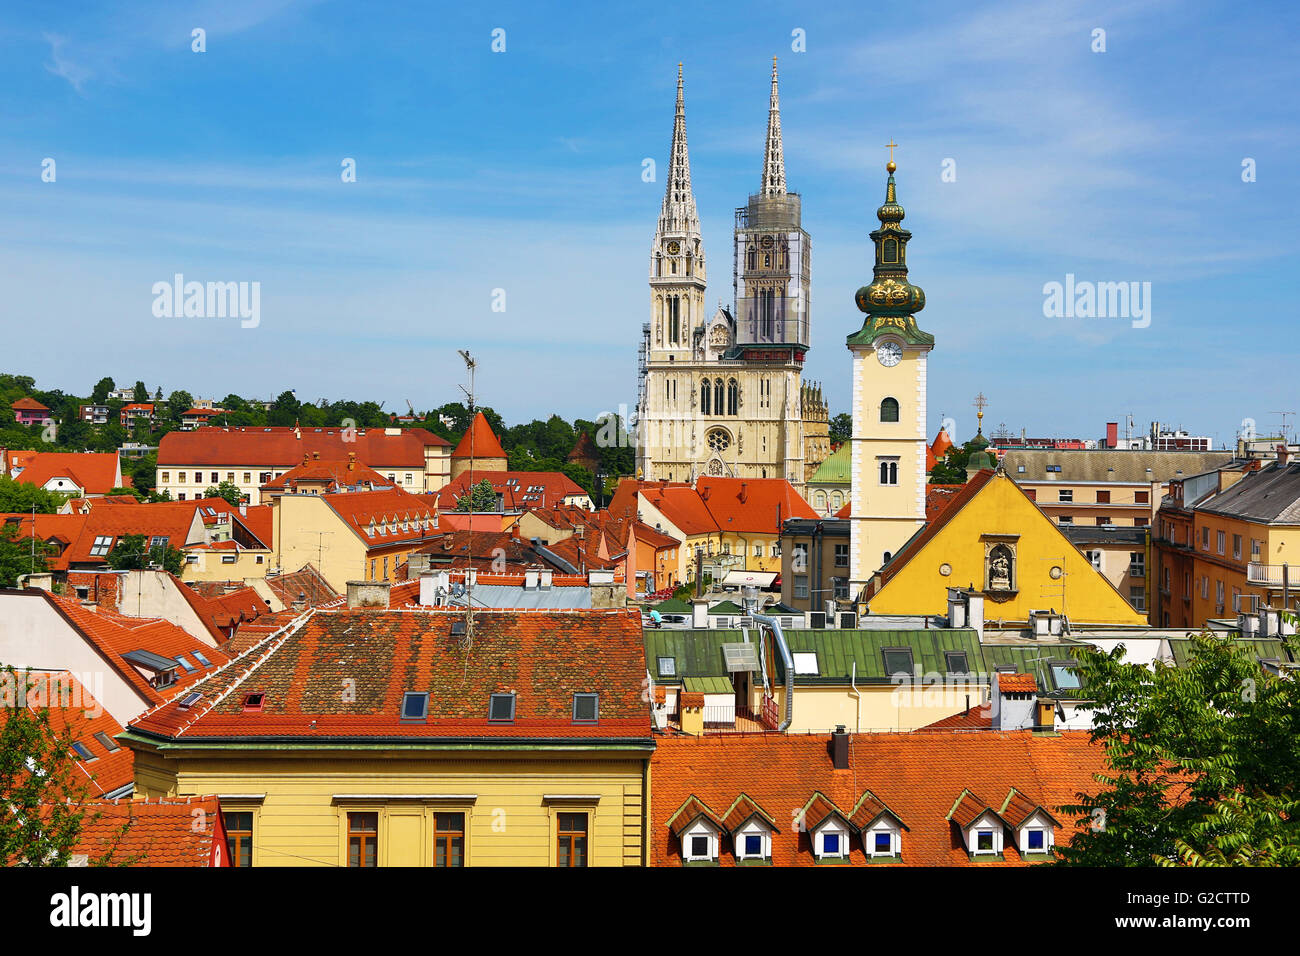 General city skyline view of Zagreb Cathedral with tower renovation and the tower of St. Mary's Church in Zagreb, Croatia Stock Photo